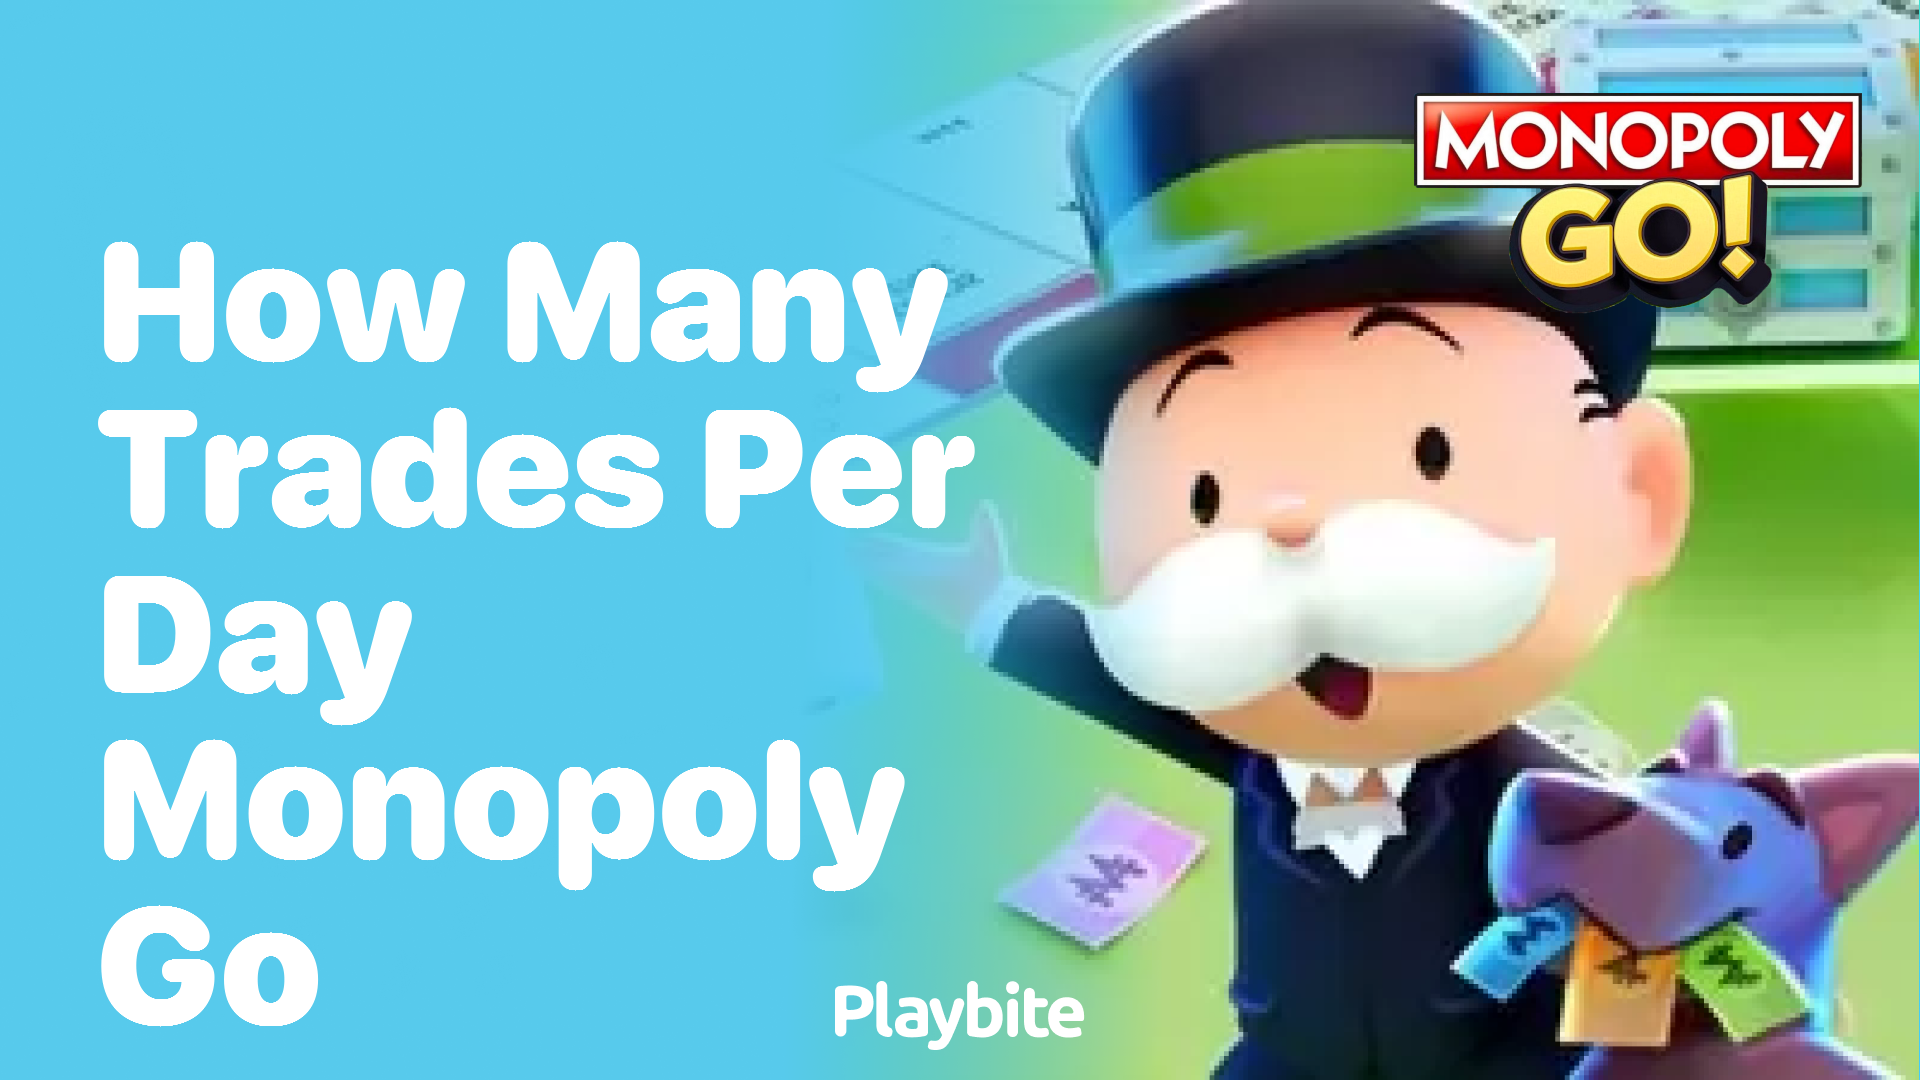 How Many Trades Can You Make Per Day in Monopoly Go?